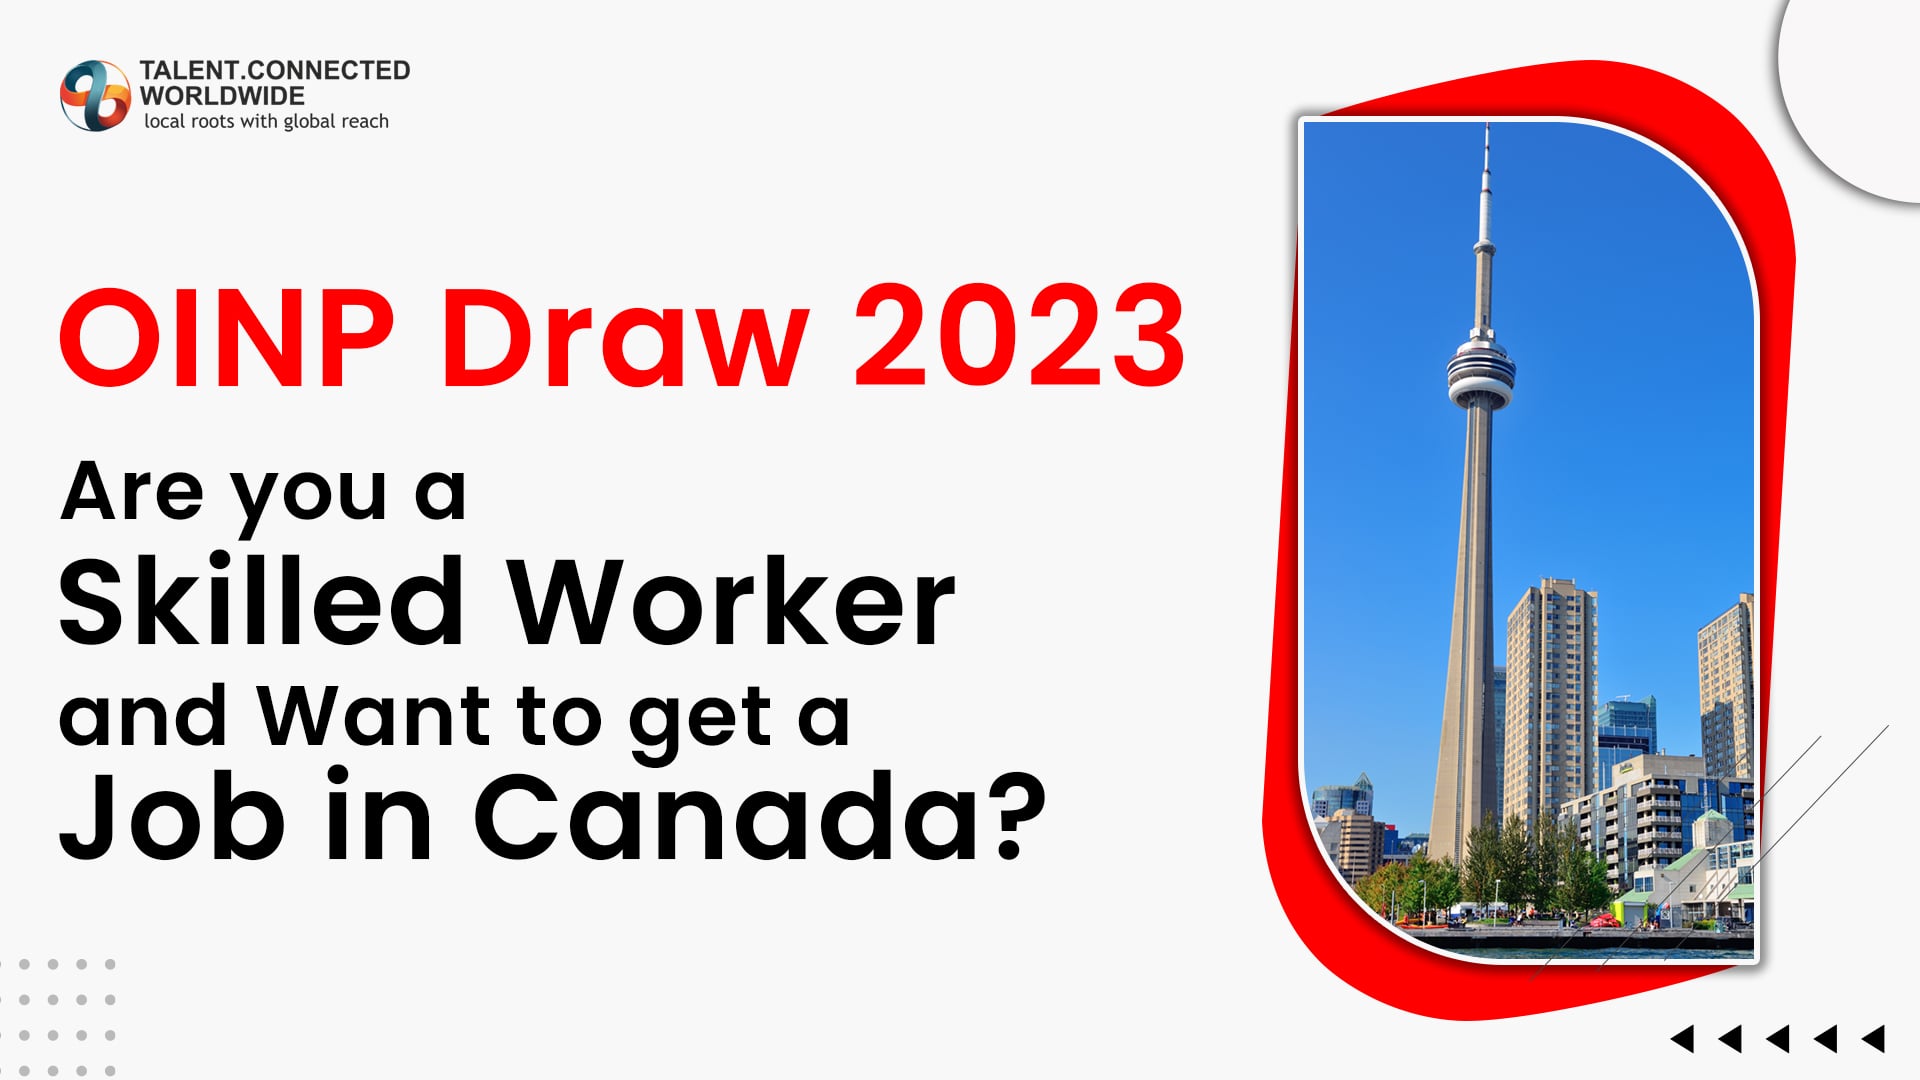 OINP Draw 2023 Are you a skilled worker and Want to get a “Job in Canada"